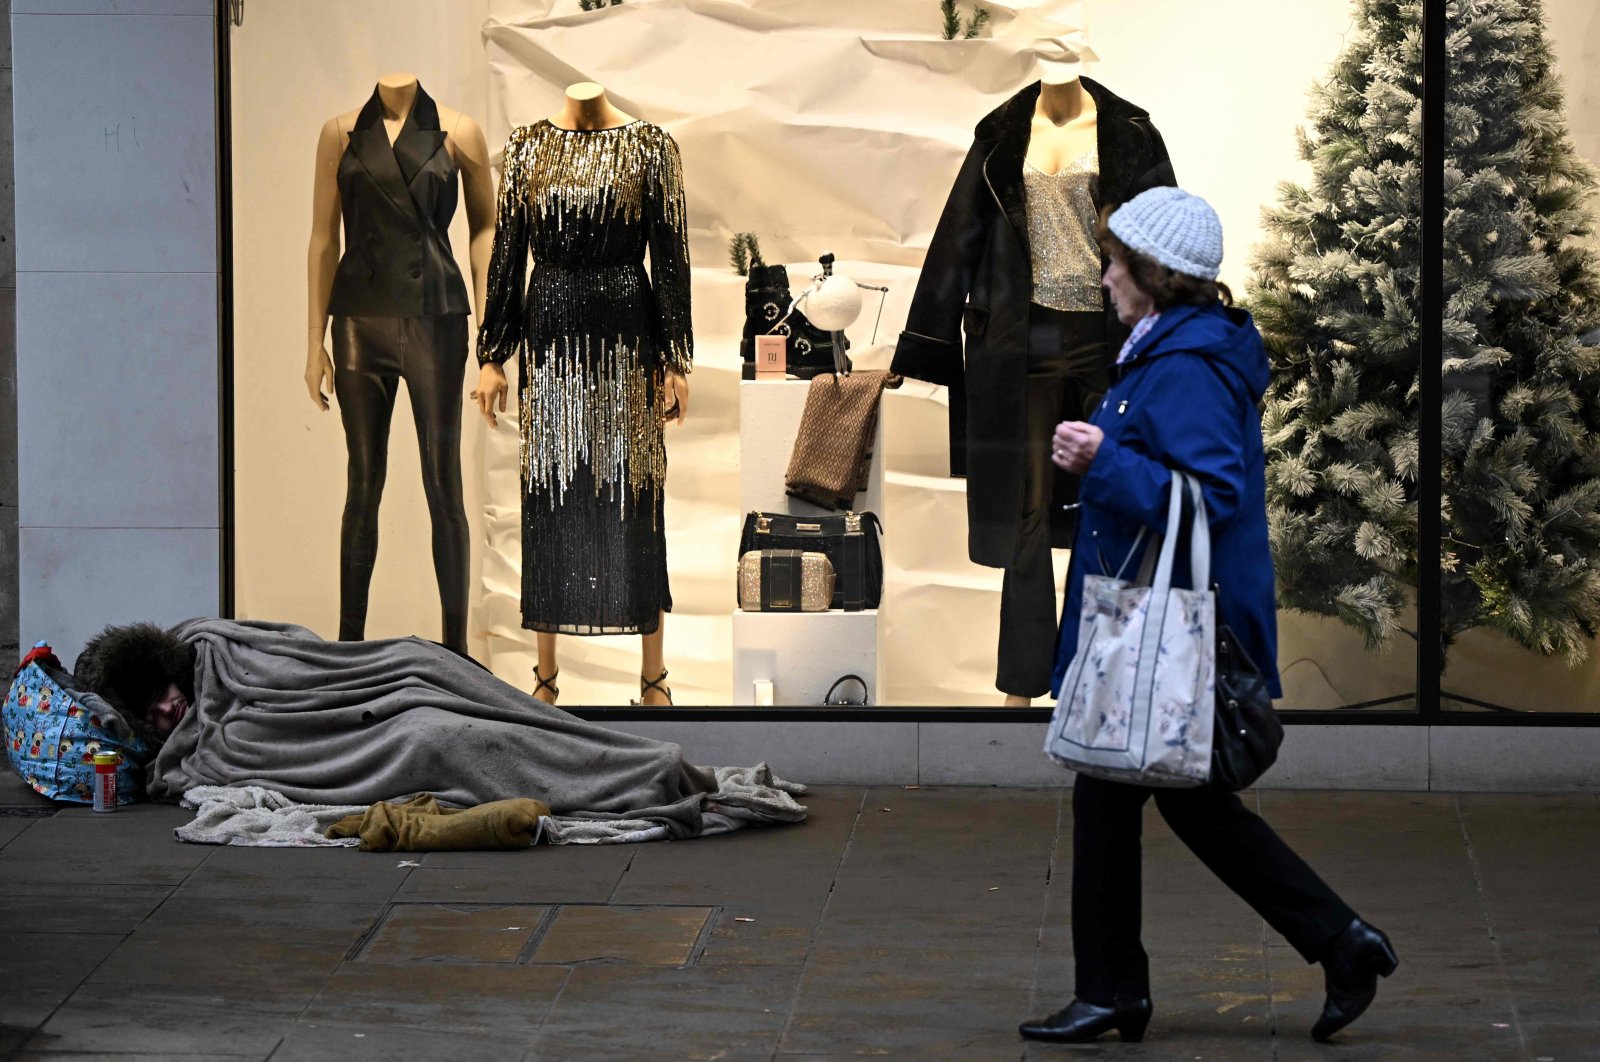 A pedestrian walks past a homeless person sleeping on the floor in front of a clothing shop decorated for Christmas in Chester, U.K., Nov. 17, 2022. (AFP Photo)